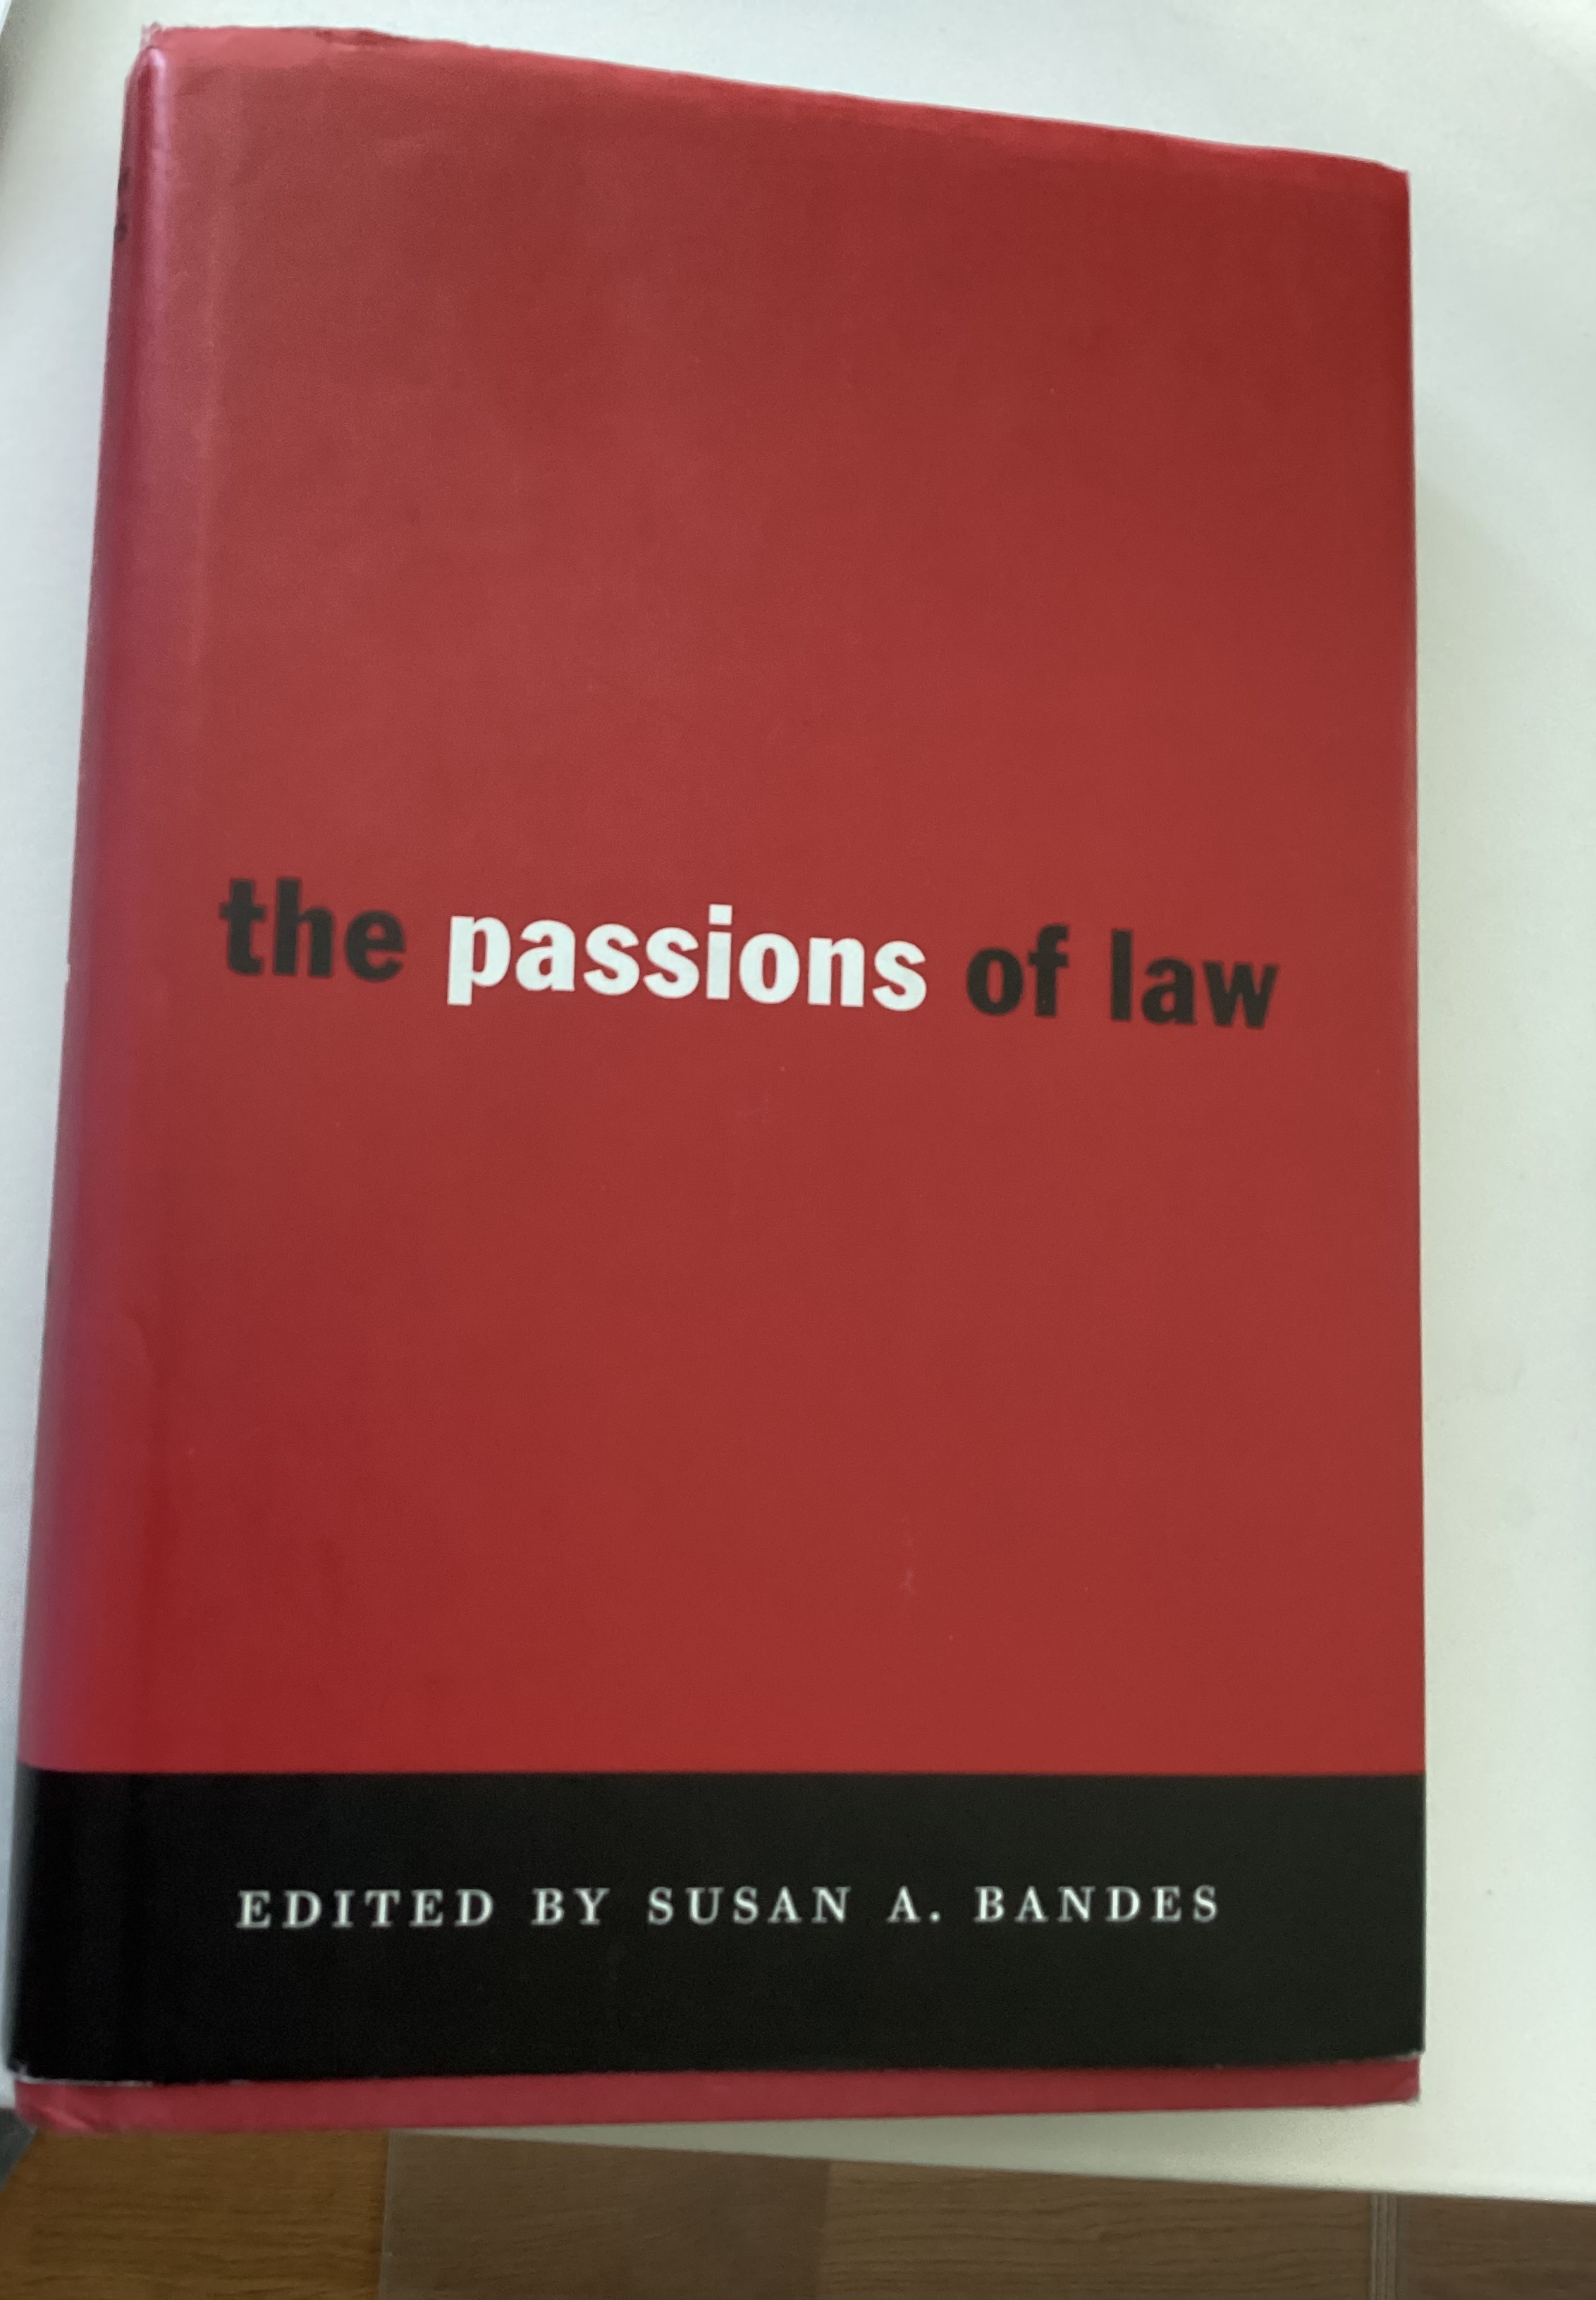 Cover photo of The Passions of Law by Susan A. Bandes (red and black cover with white writing)